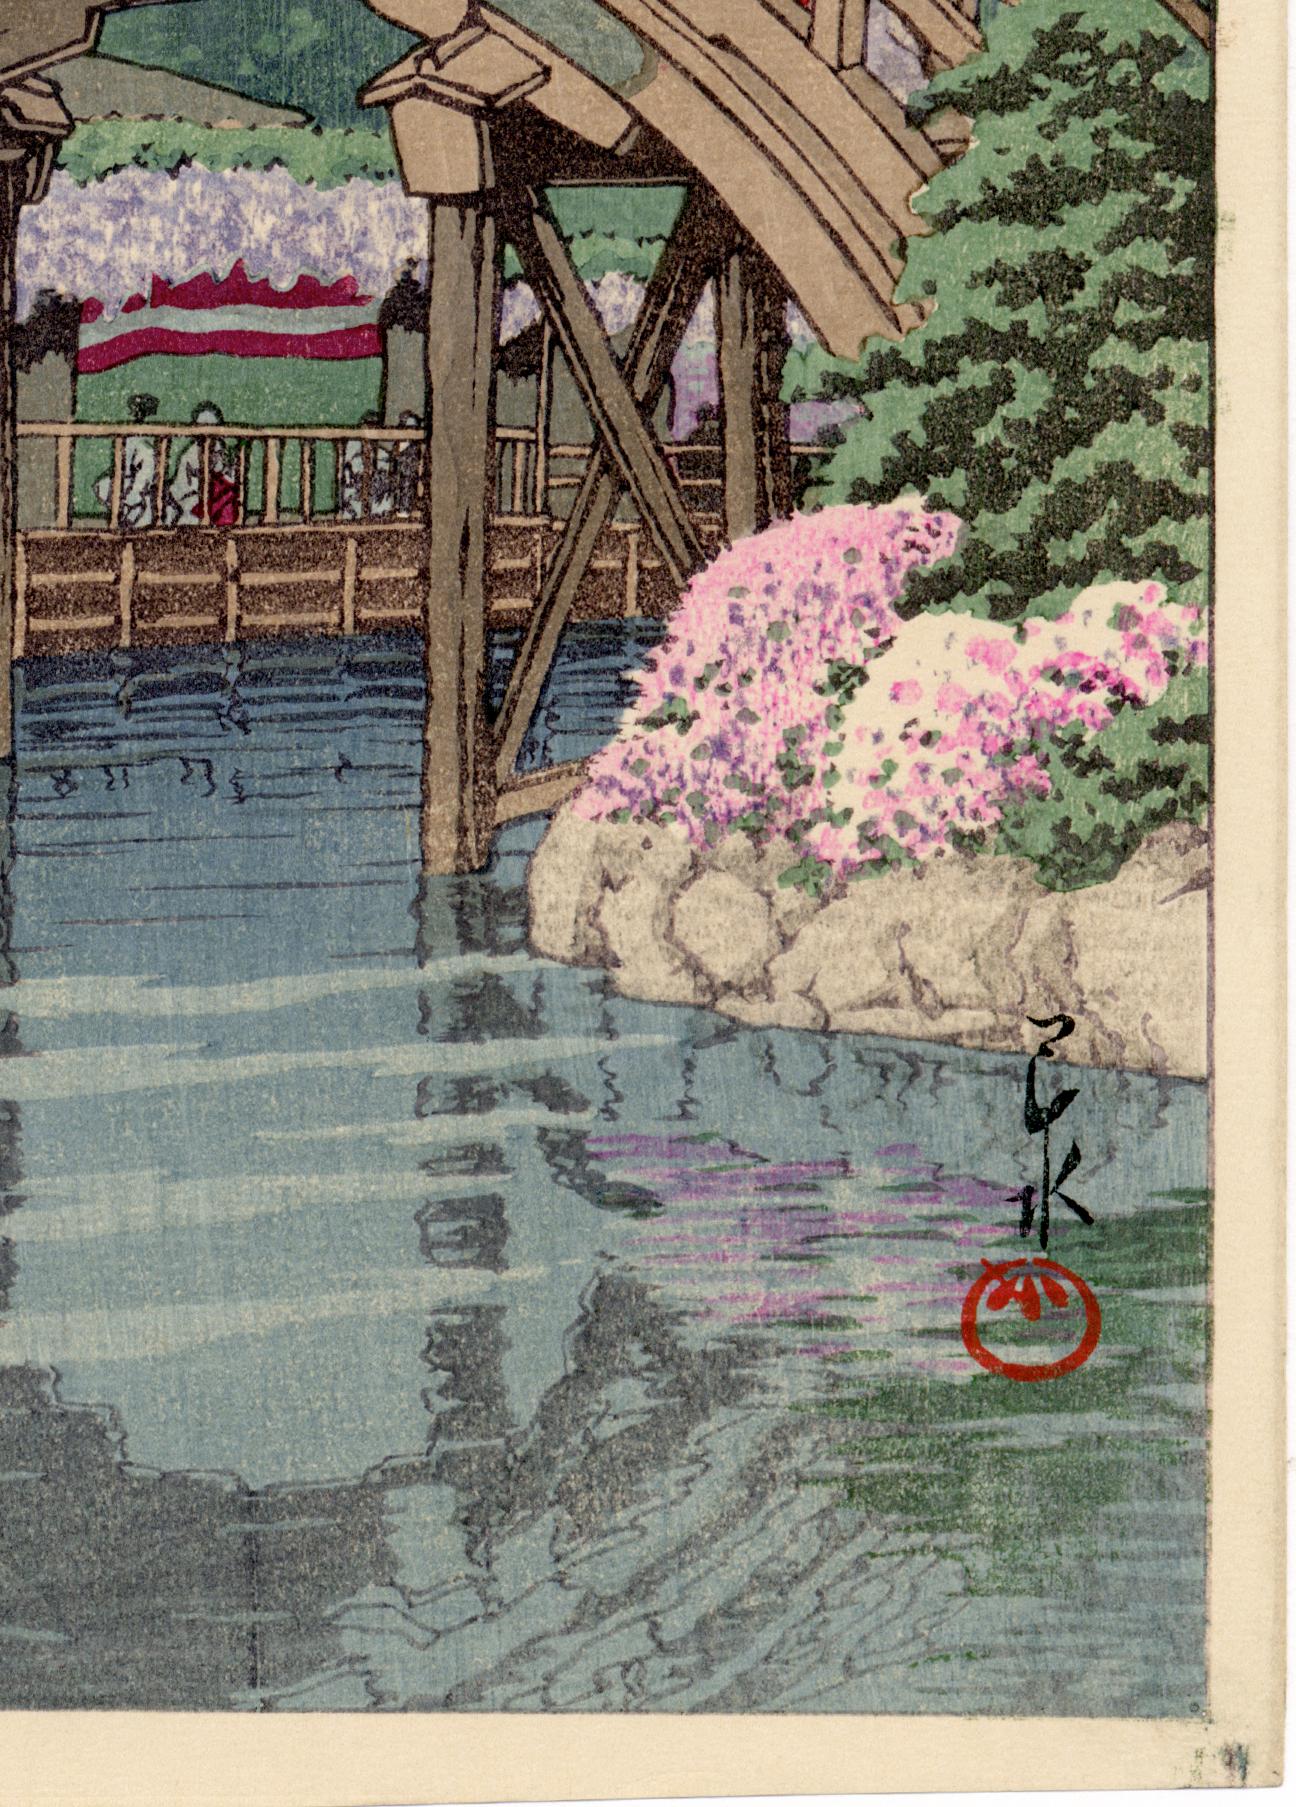 First edition original Japanese Color Woodblock print, printed in 1932. Famous view of the wisteria blooming at Kameido Tenjin Shrine. A brightly-dressed young girl has stopped atop the famous half-moon bridge., seeming to regard the viewer. In the